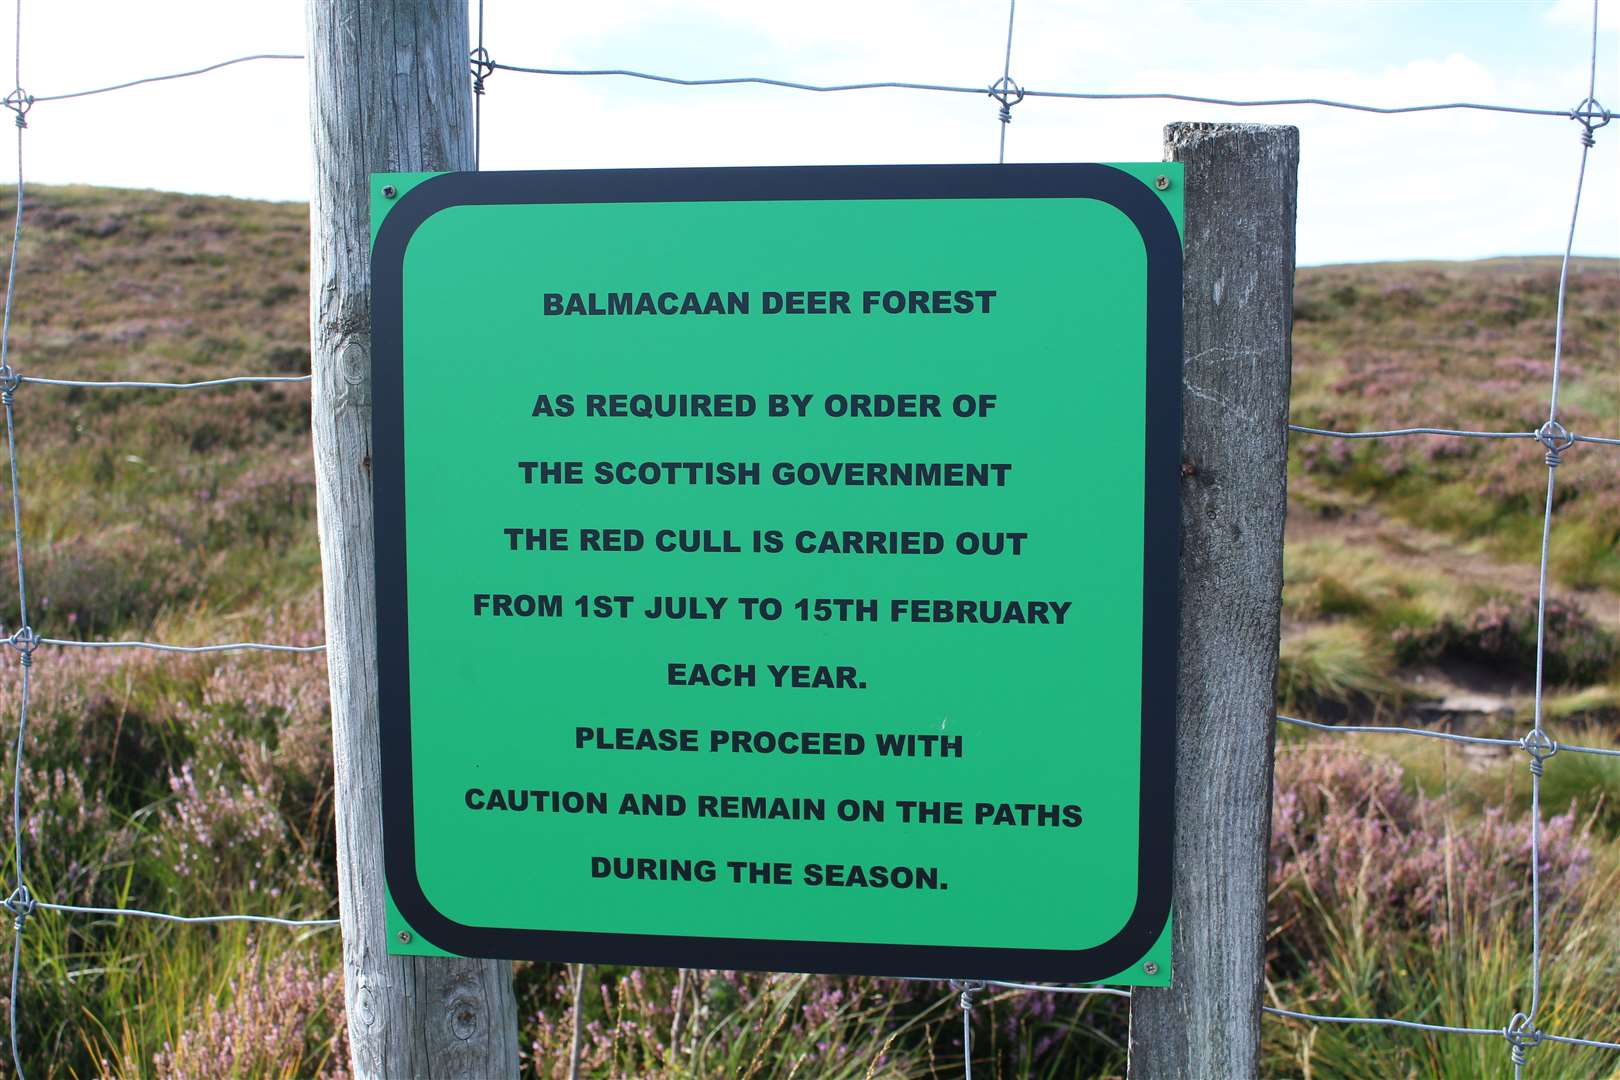 The sign beside the stile offers scant information about stalking activities in the area.